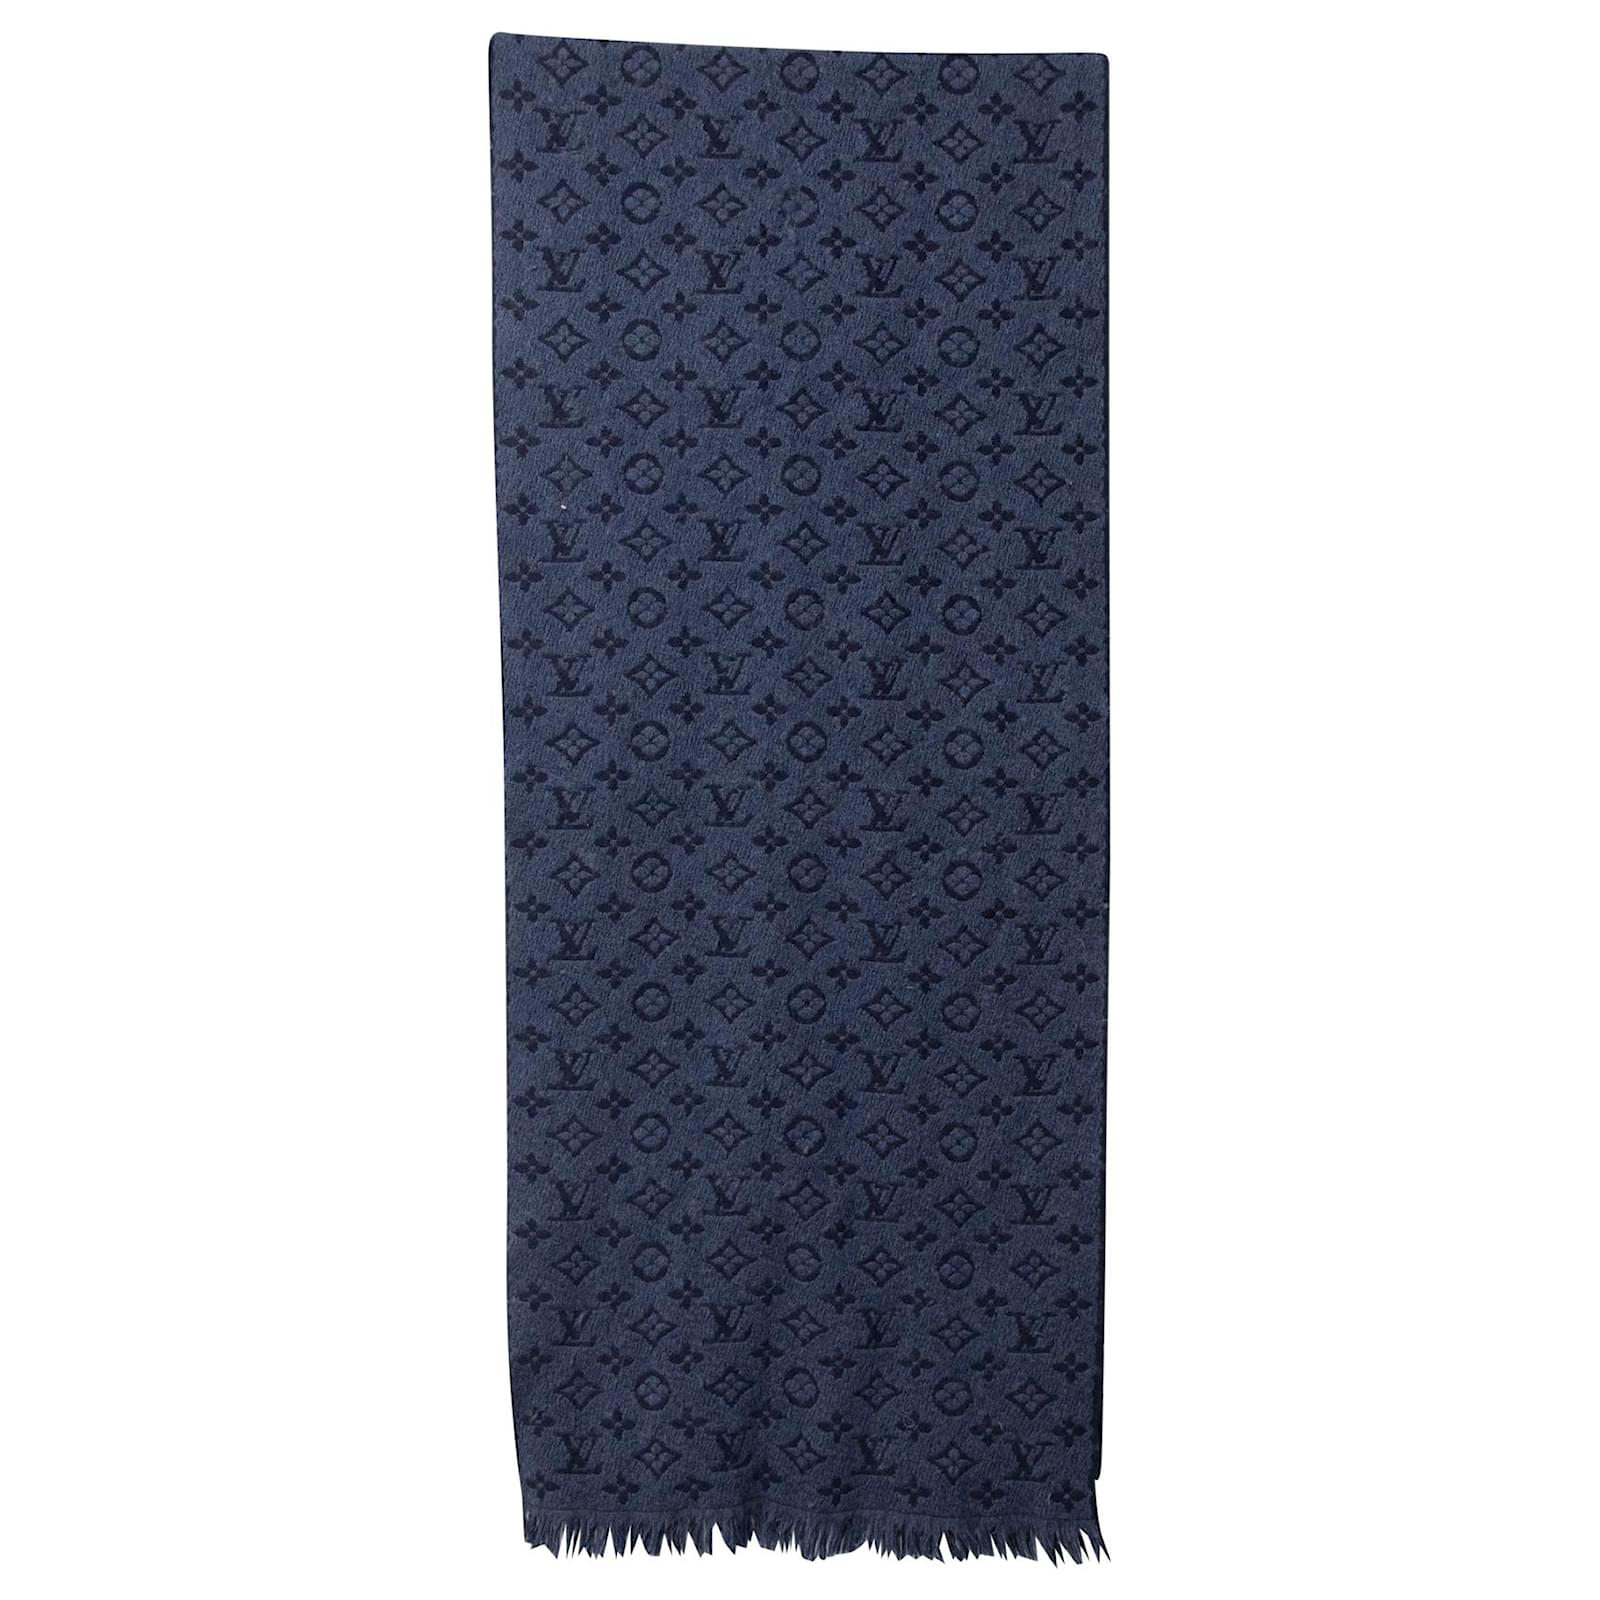 Louis Vuitton All About Mng Scarf Navy Blue Wool